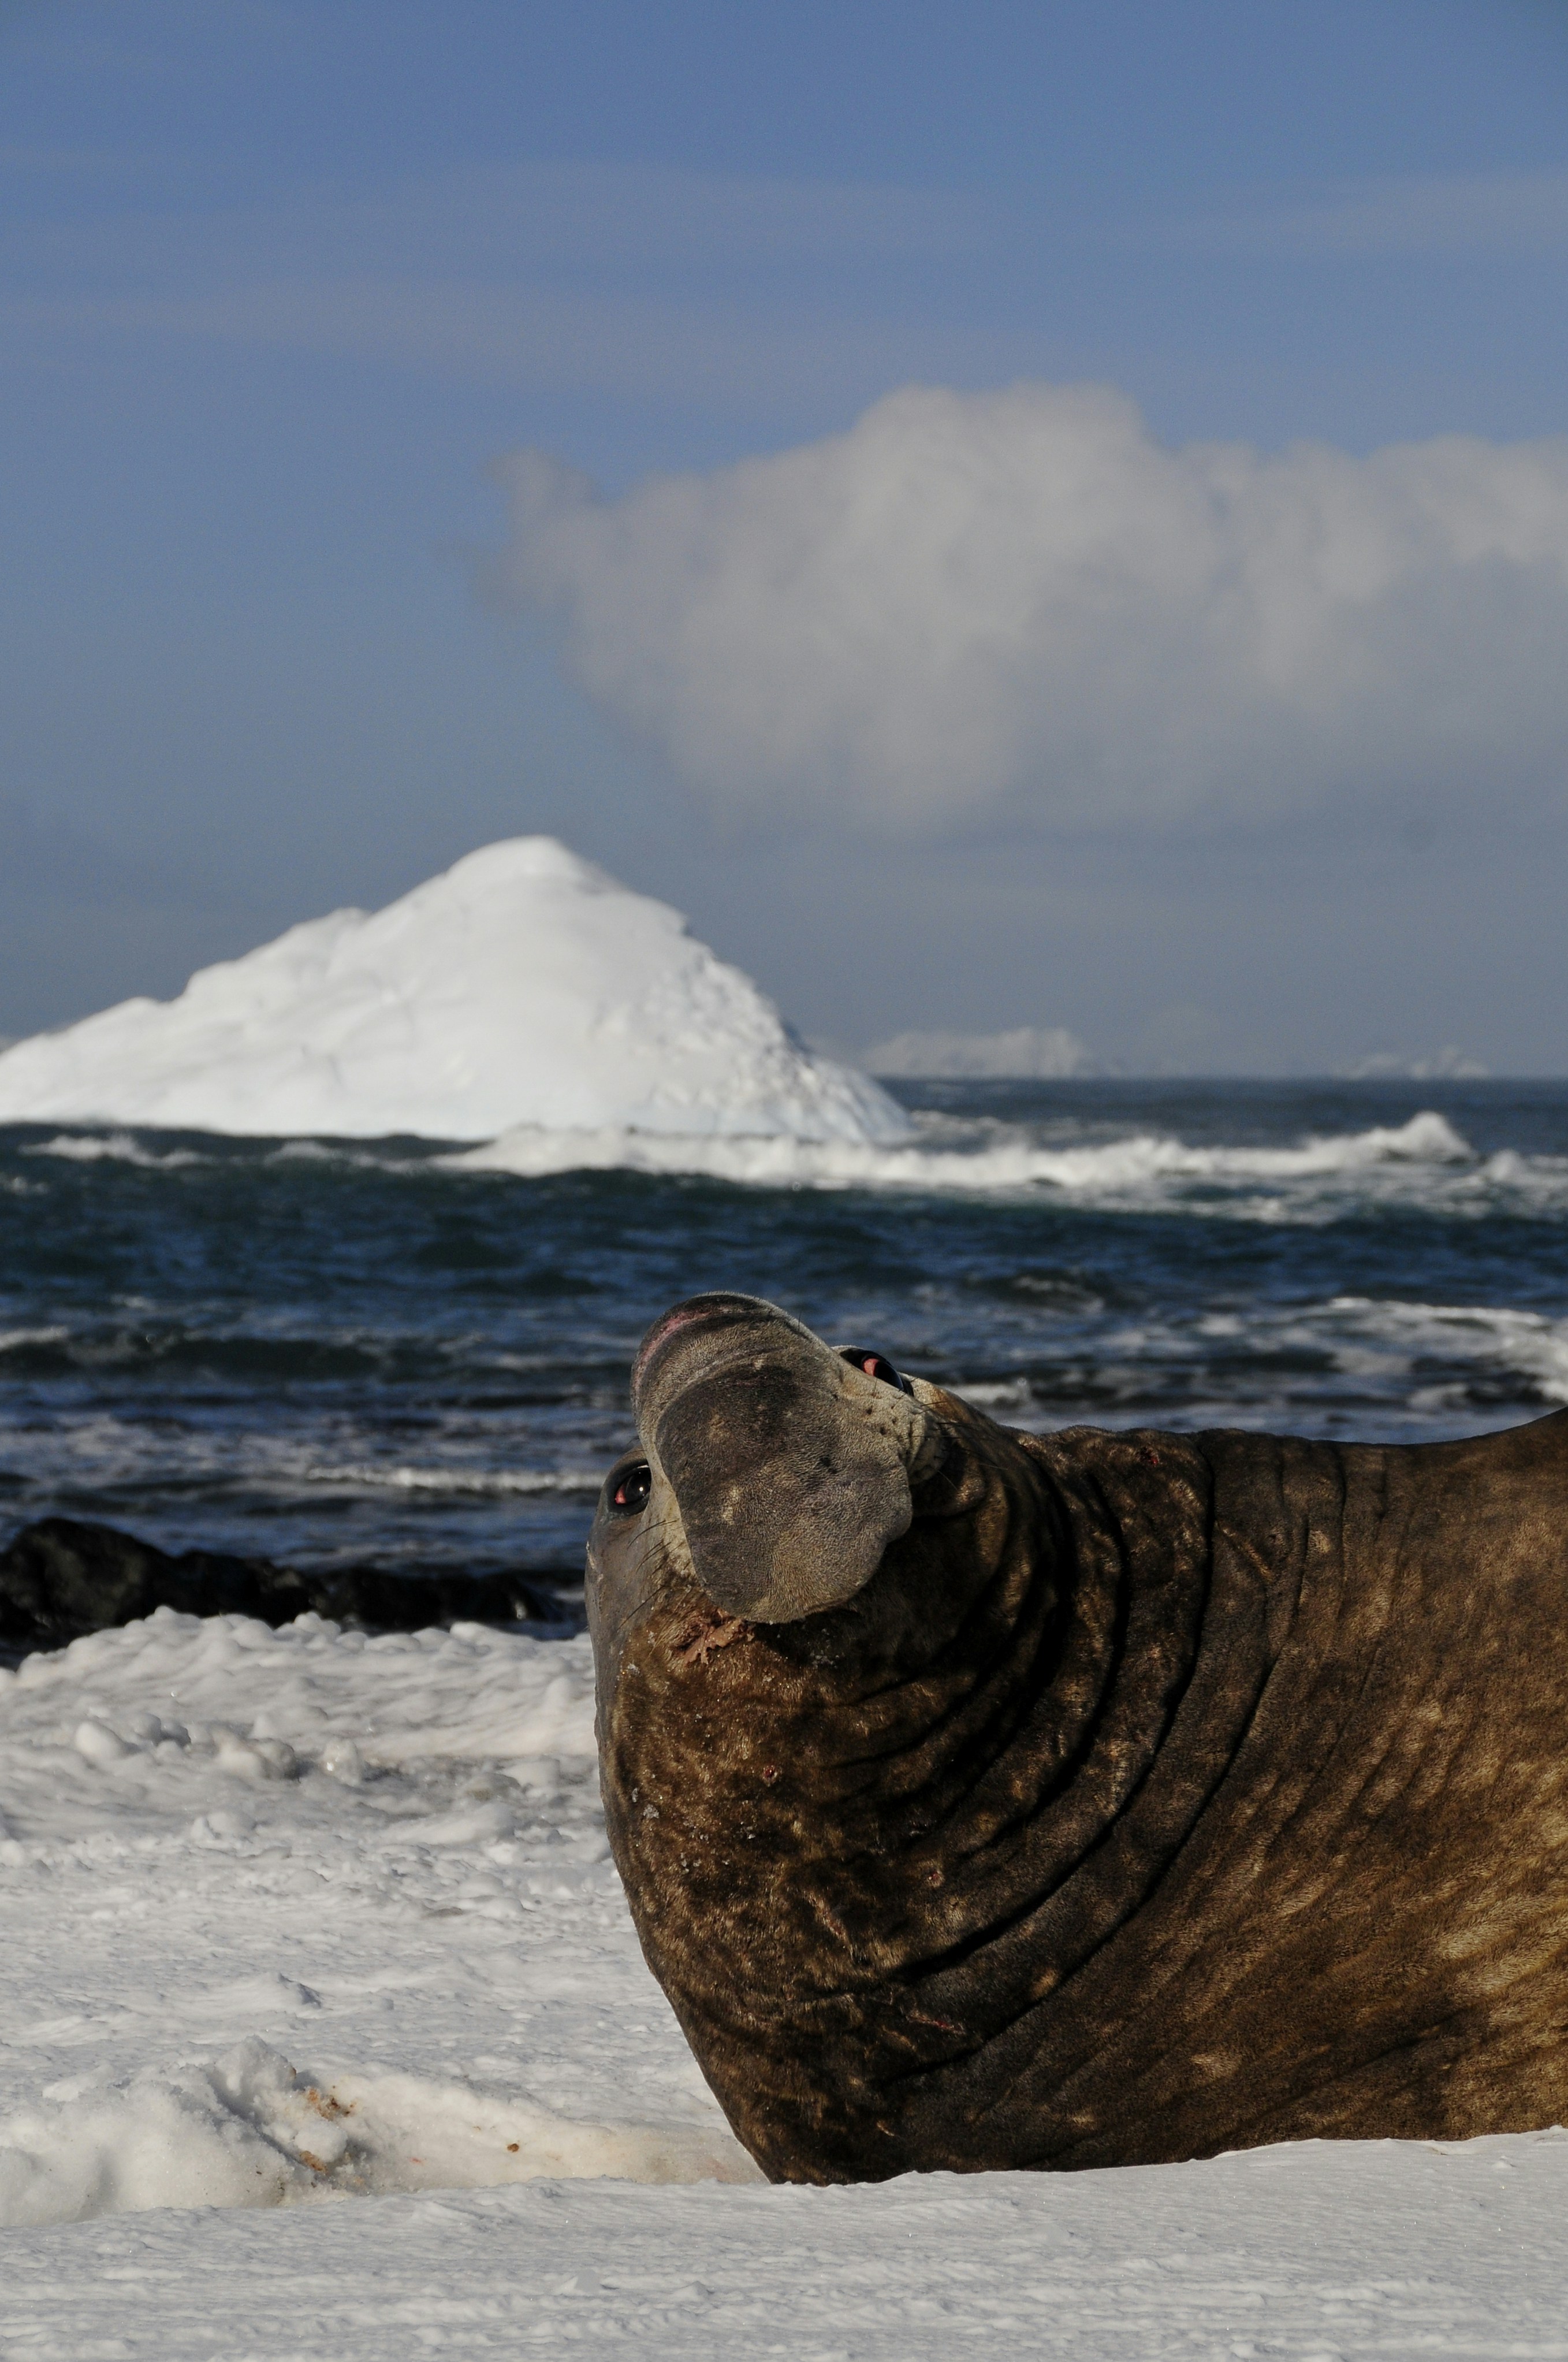 A southern elephant seal bull, at home among the icebergs.